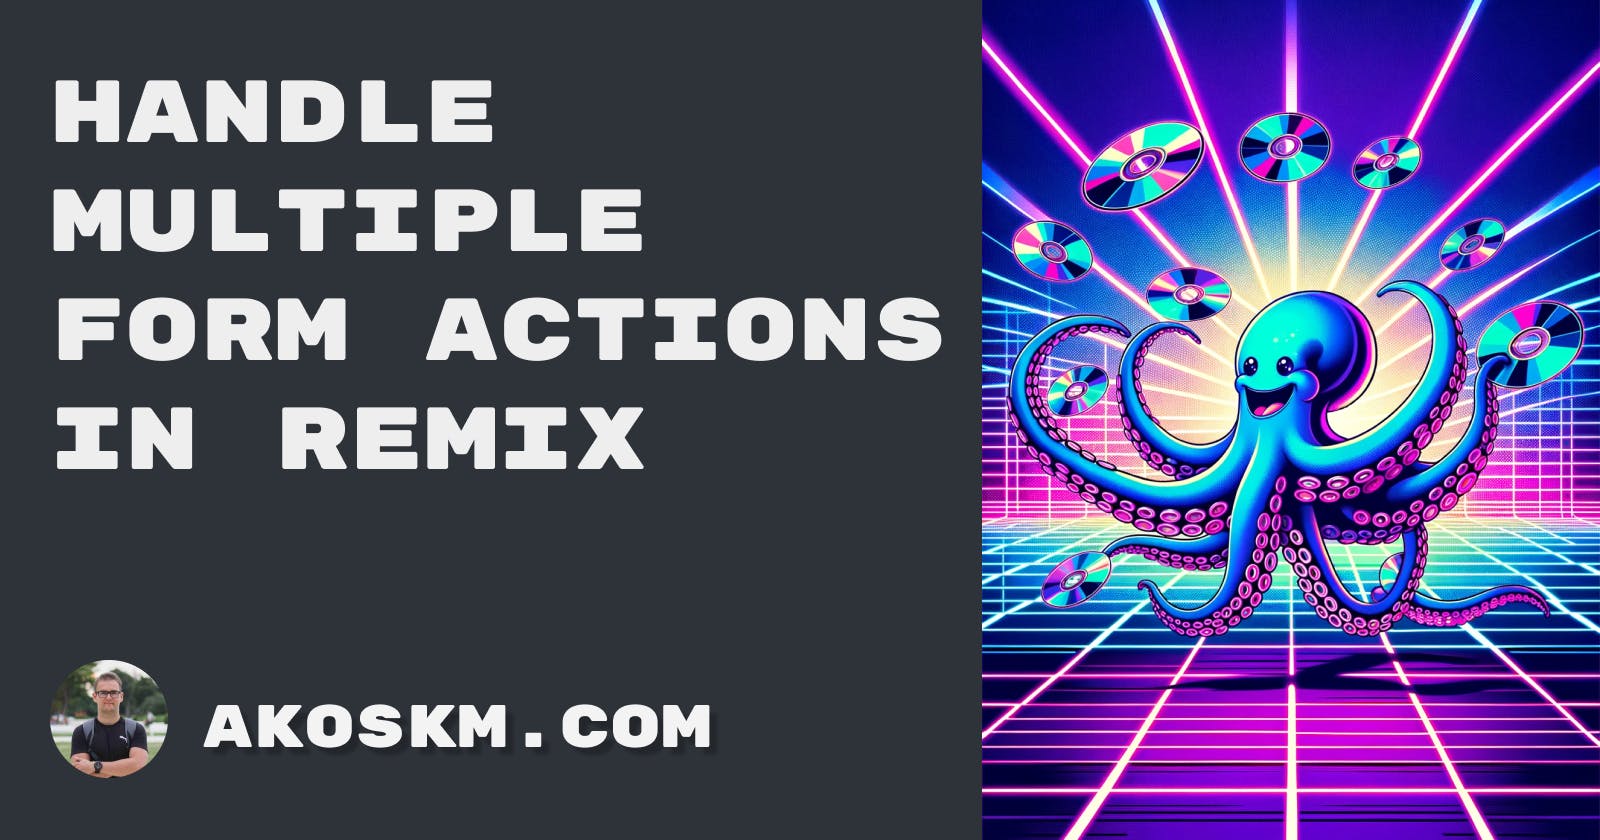 How to handle multiple form actions in Remix